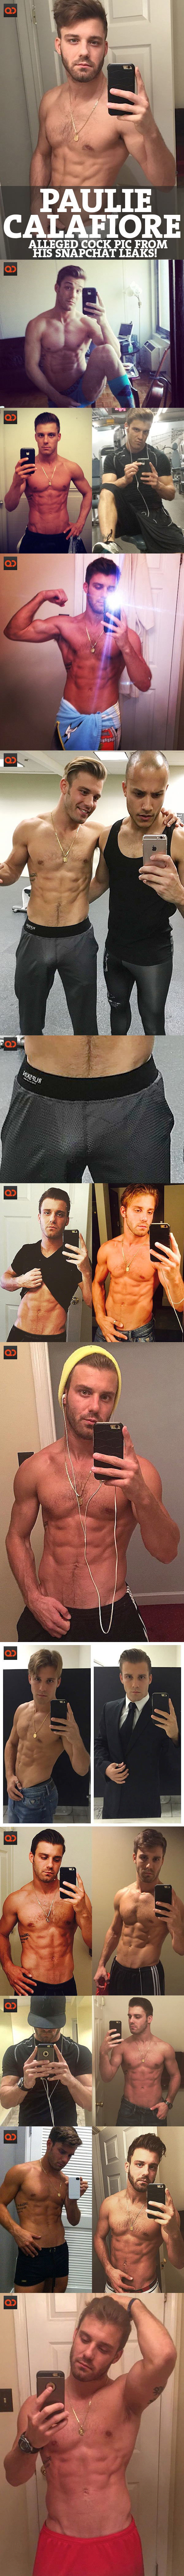 qc-paulie_calafiore_alleged_cock_pic_snapchat_leaks-collage01